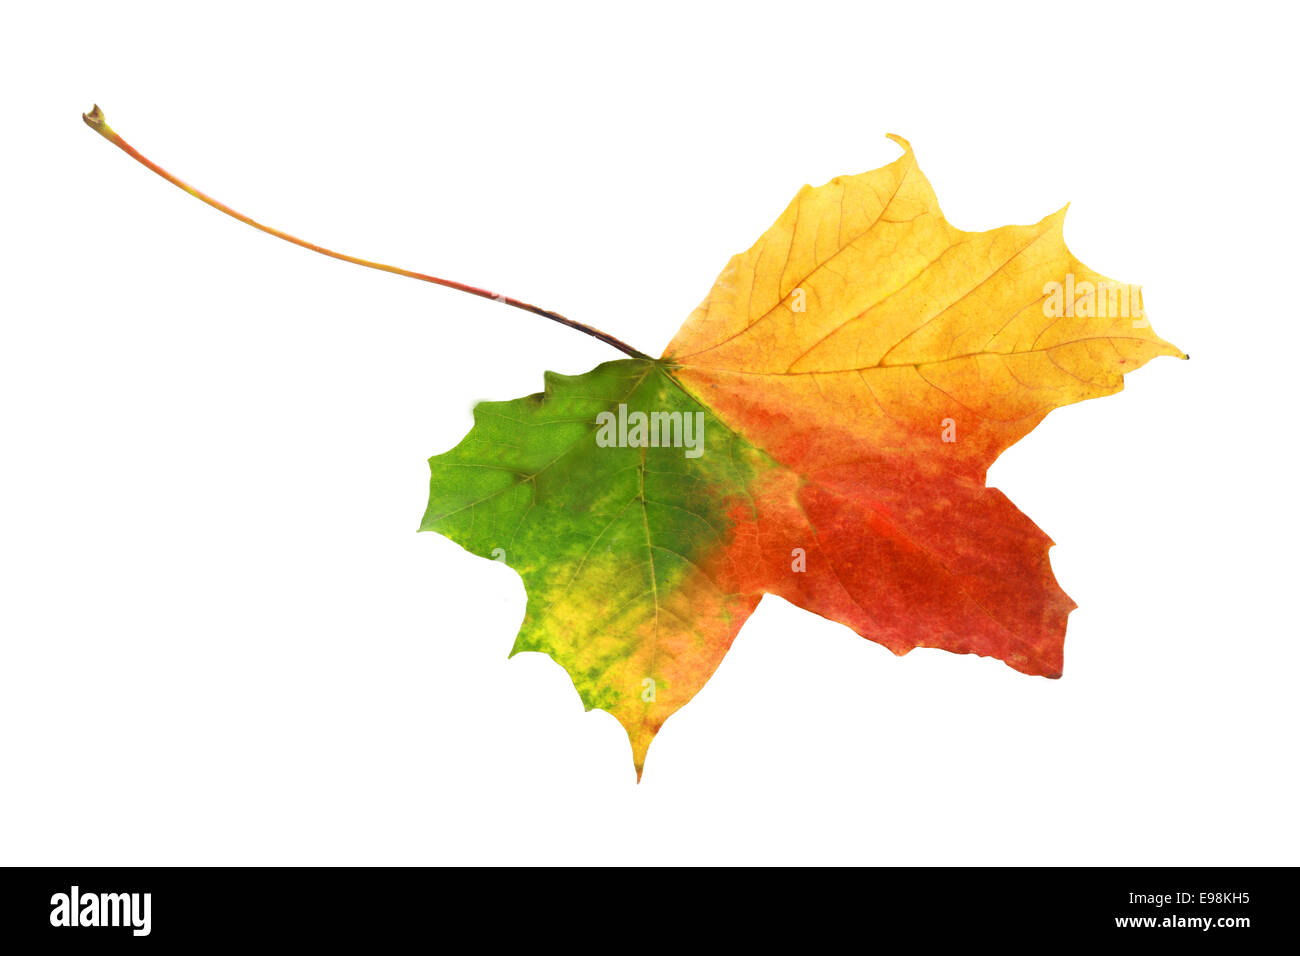 Beautiful bright vibrant tricolor autumn leaf in shades of red, green and yellow showing the changing of the seasons isolated on a white background Stock Photo